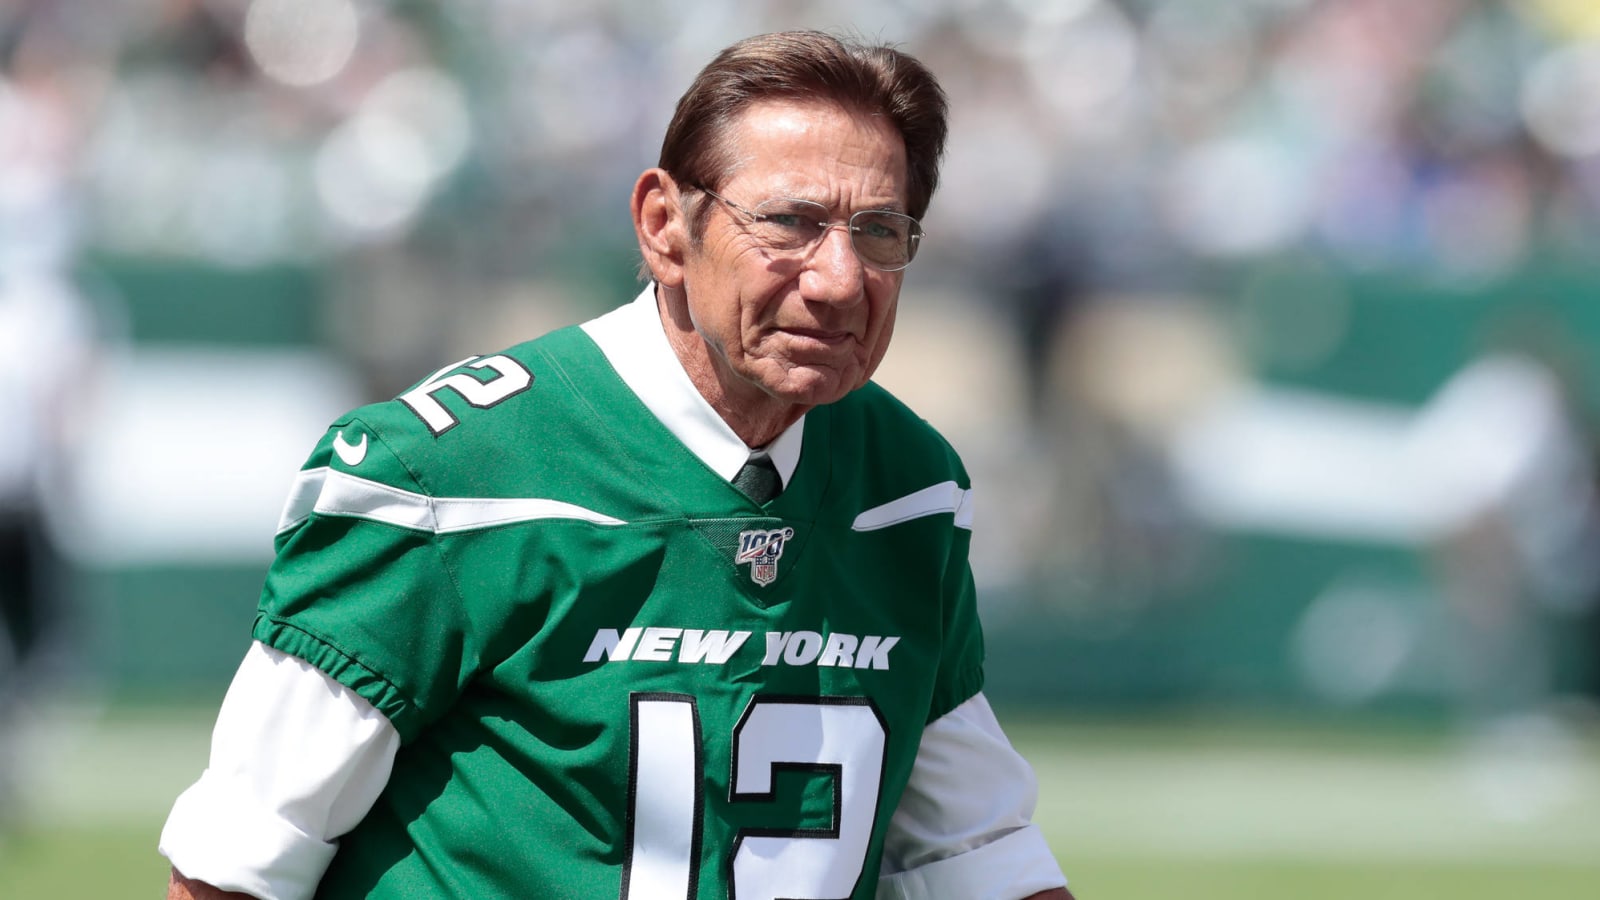 Joe Namath: Trevor Lawrence could force trade from Jets